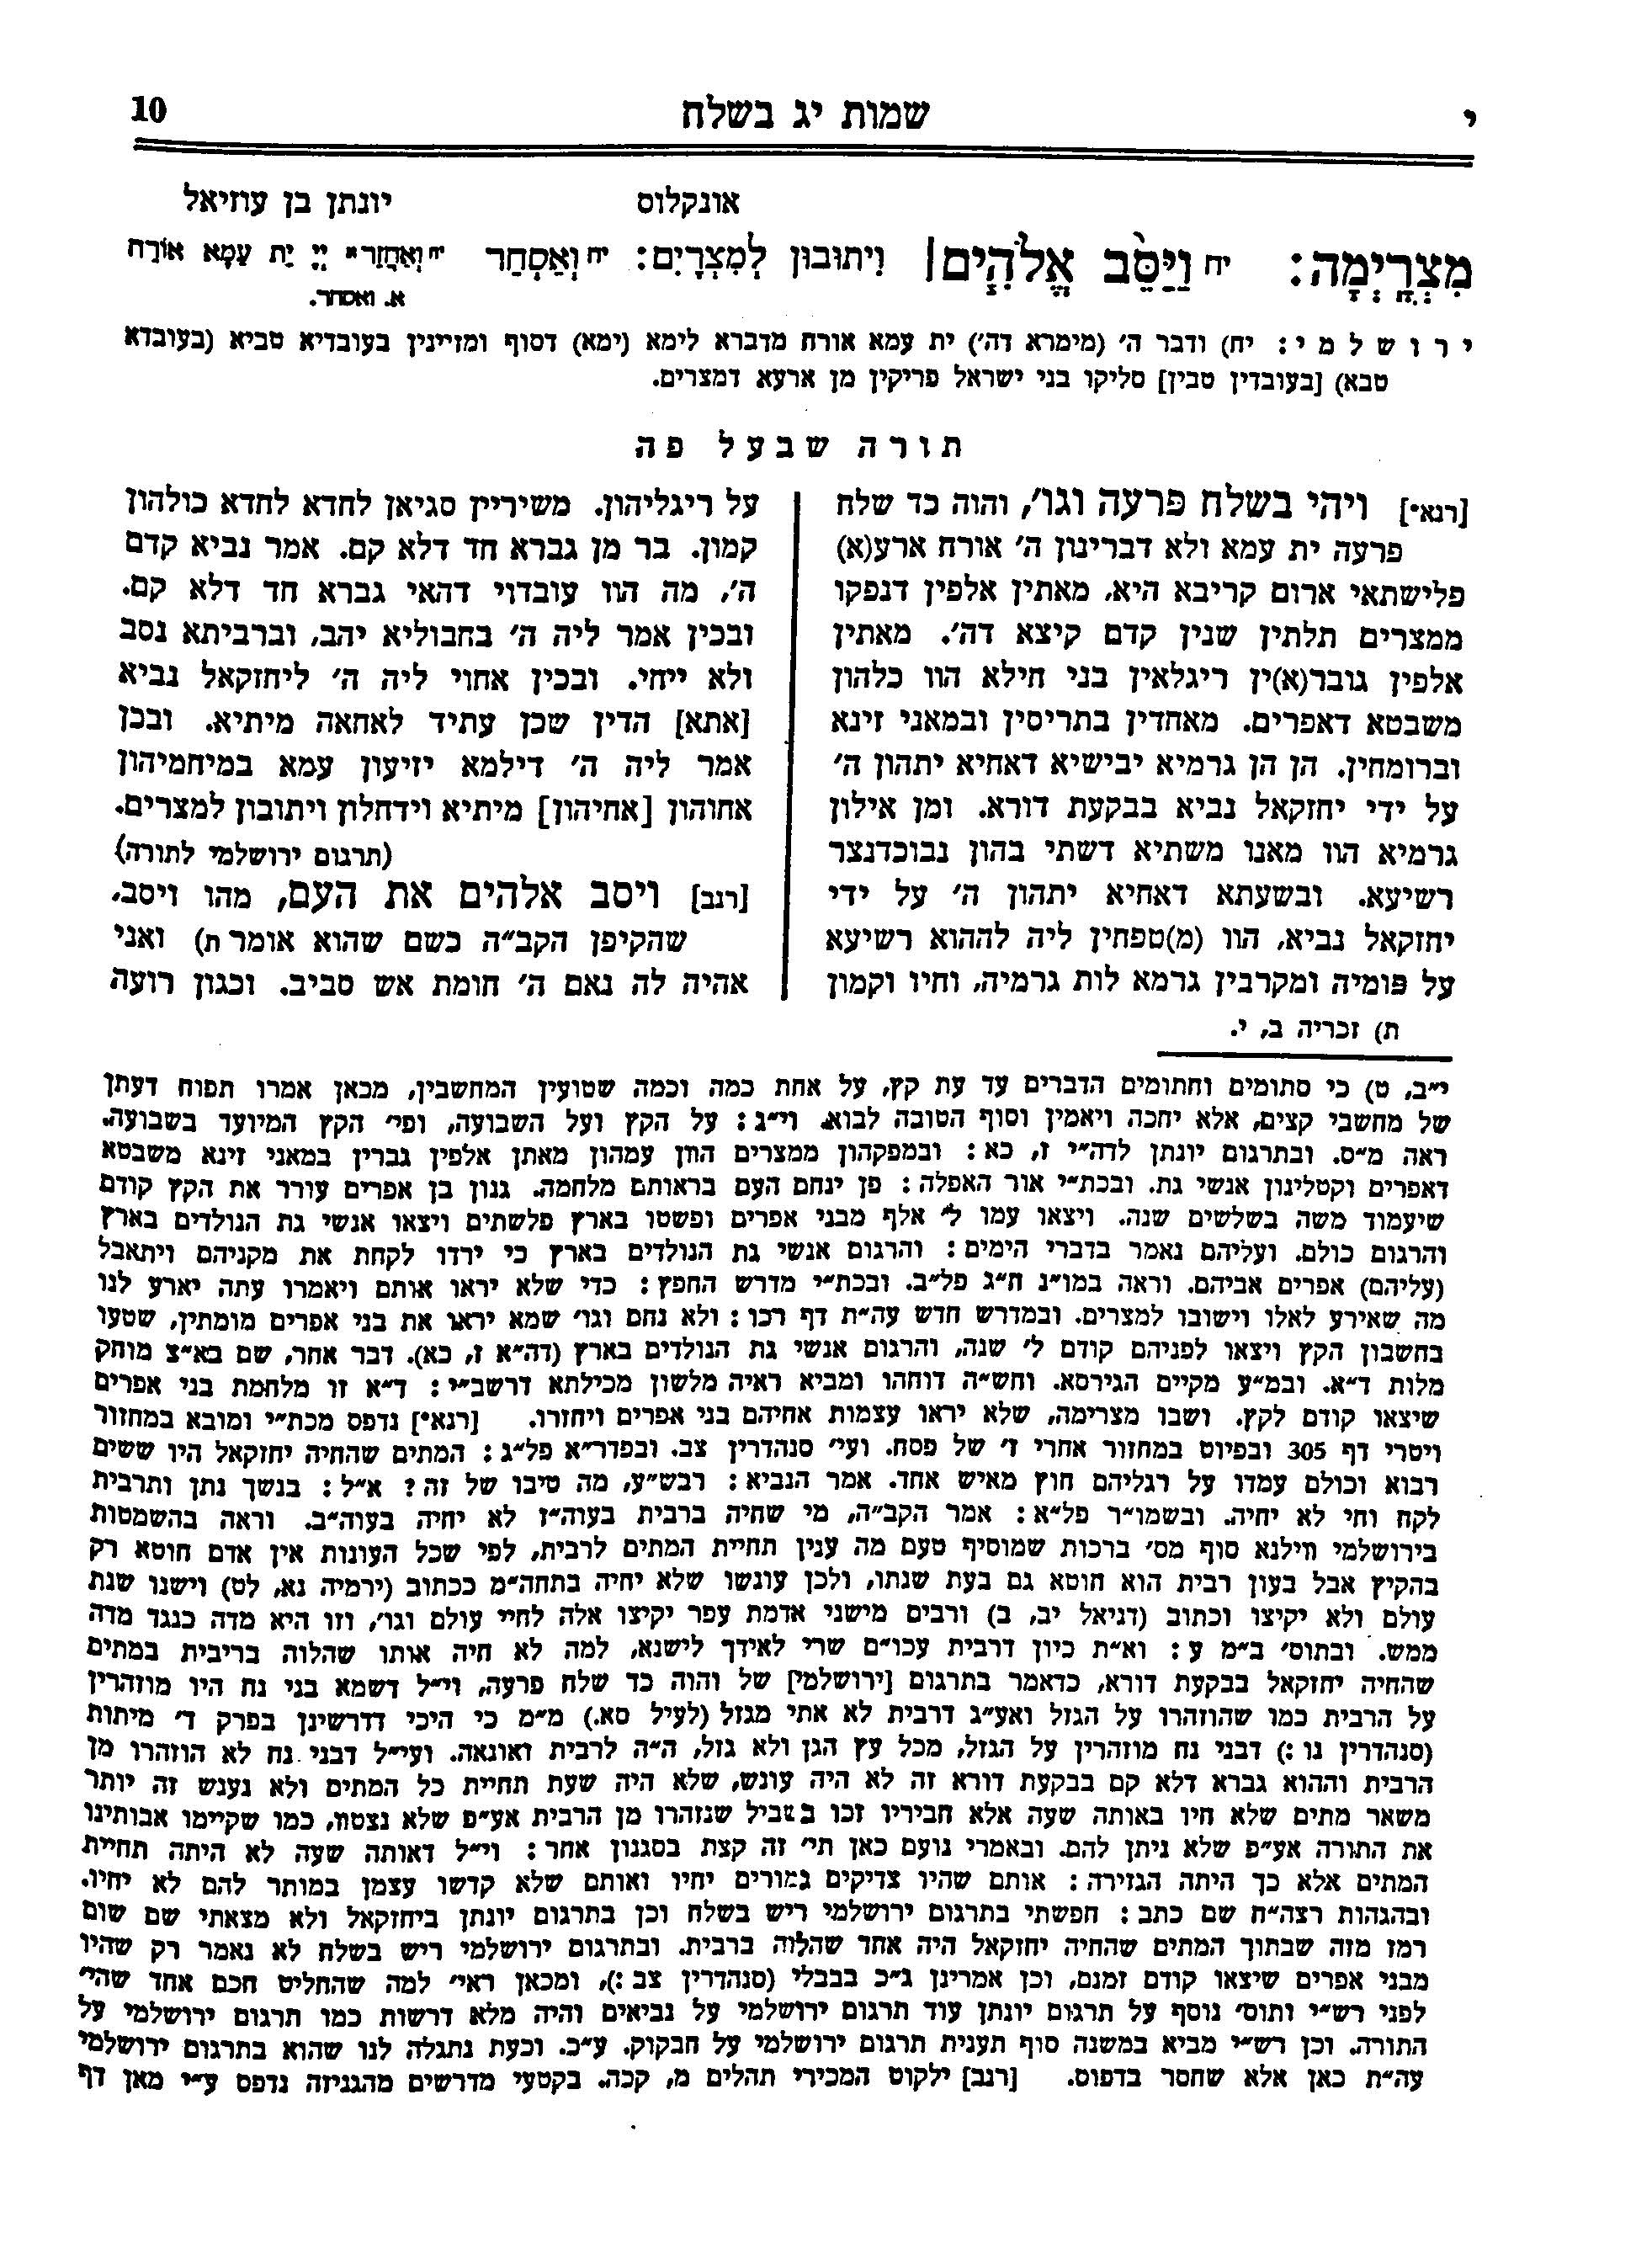 Pages from Hebrewbooks_org_51460-2.jpg